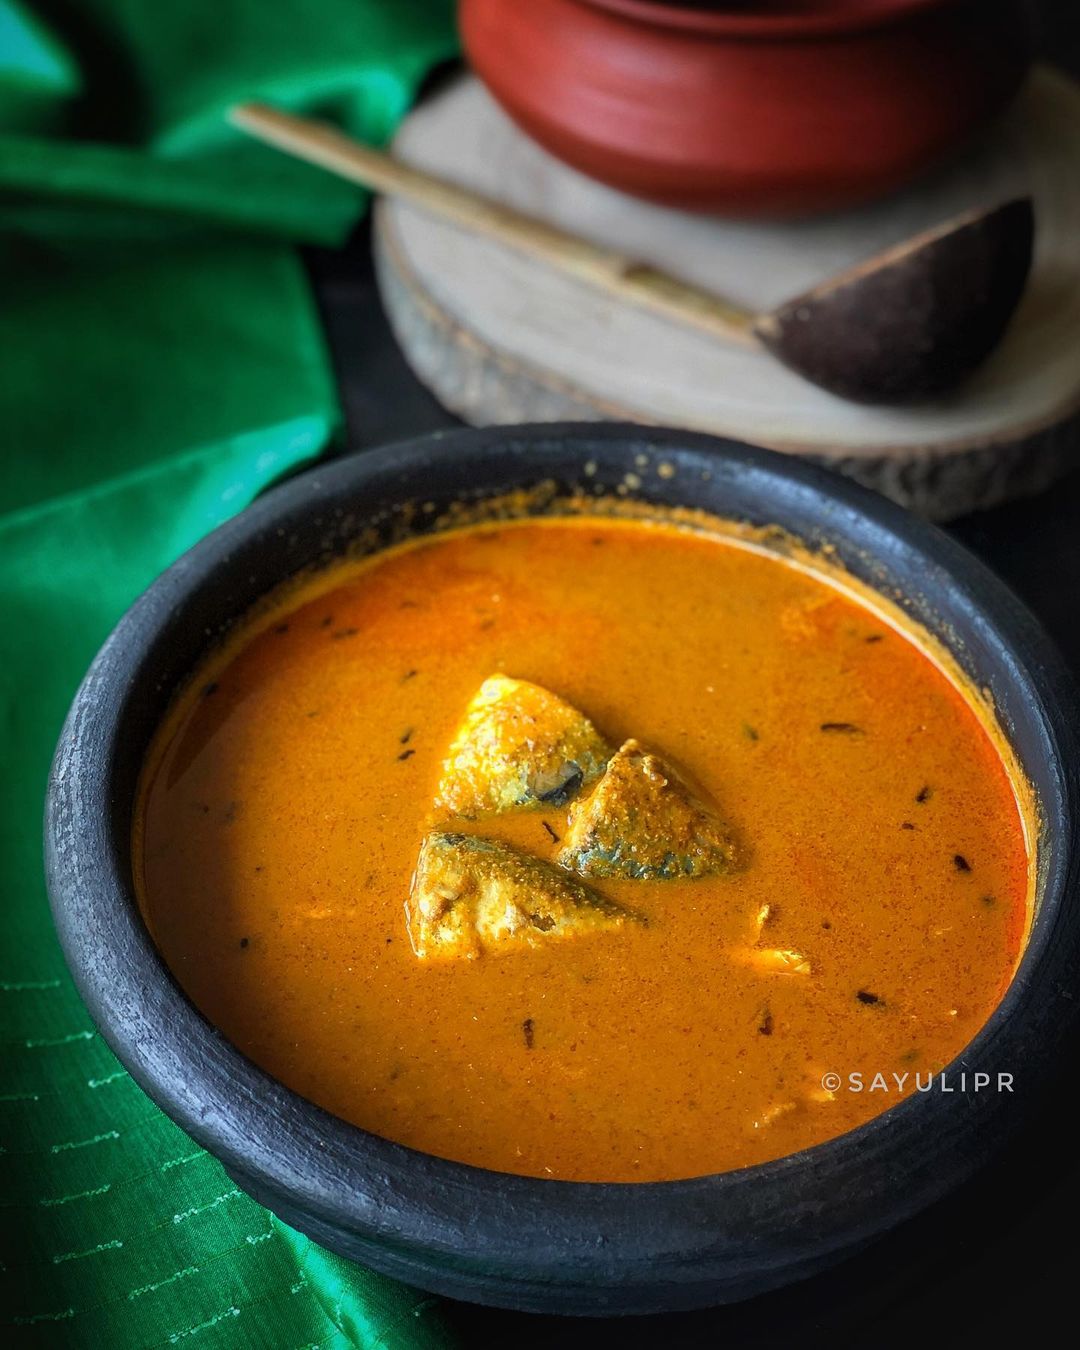 Goan dish orange fish curry with pieces of fish in it